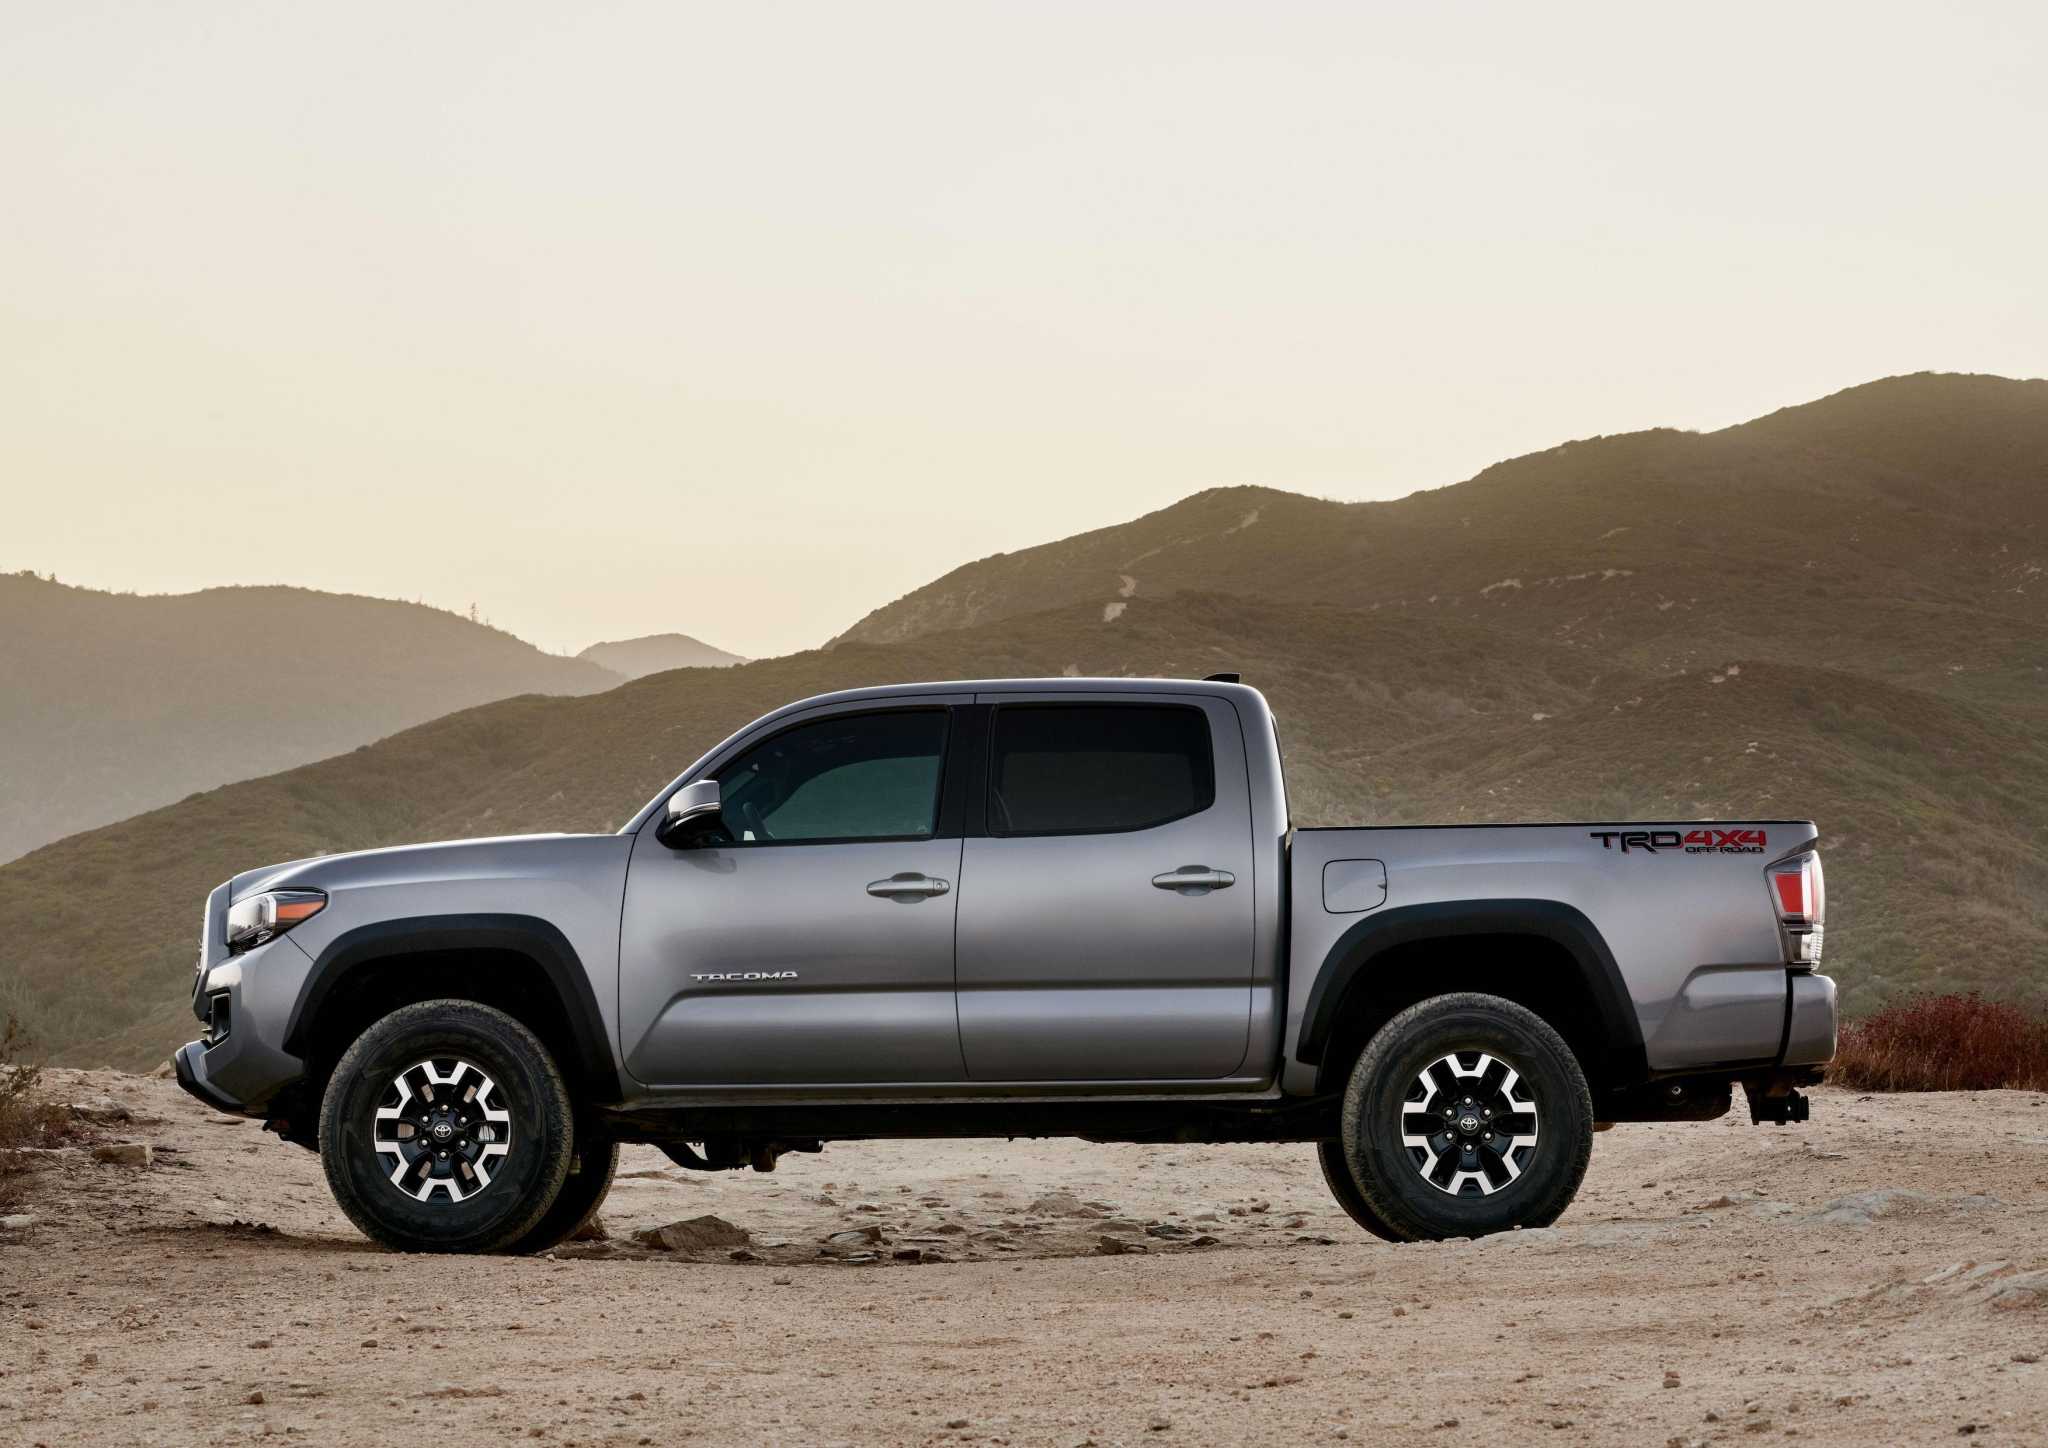 The 2020 Toyota Tacoma meets expectations before swapping factories